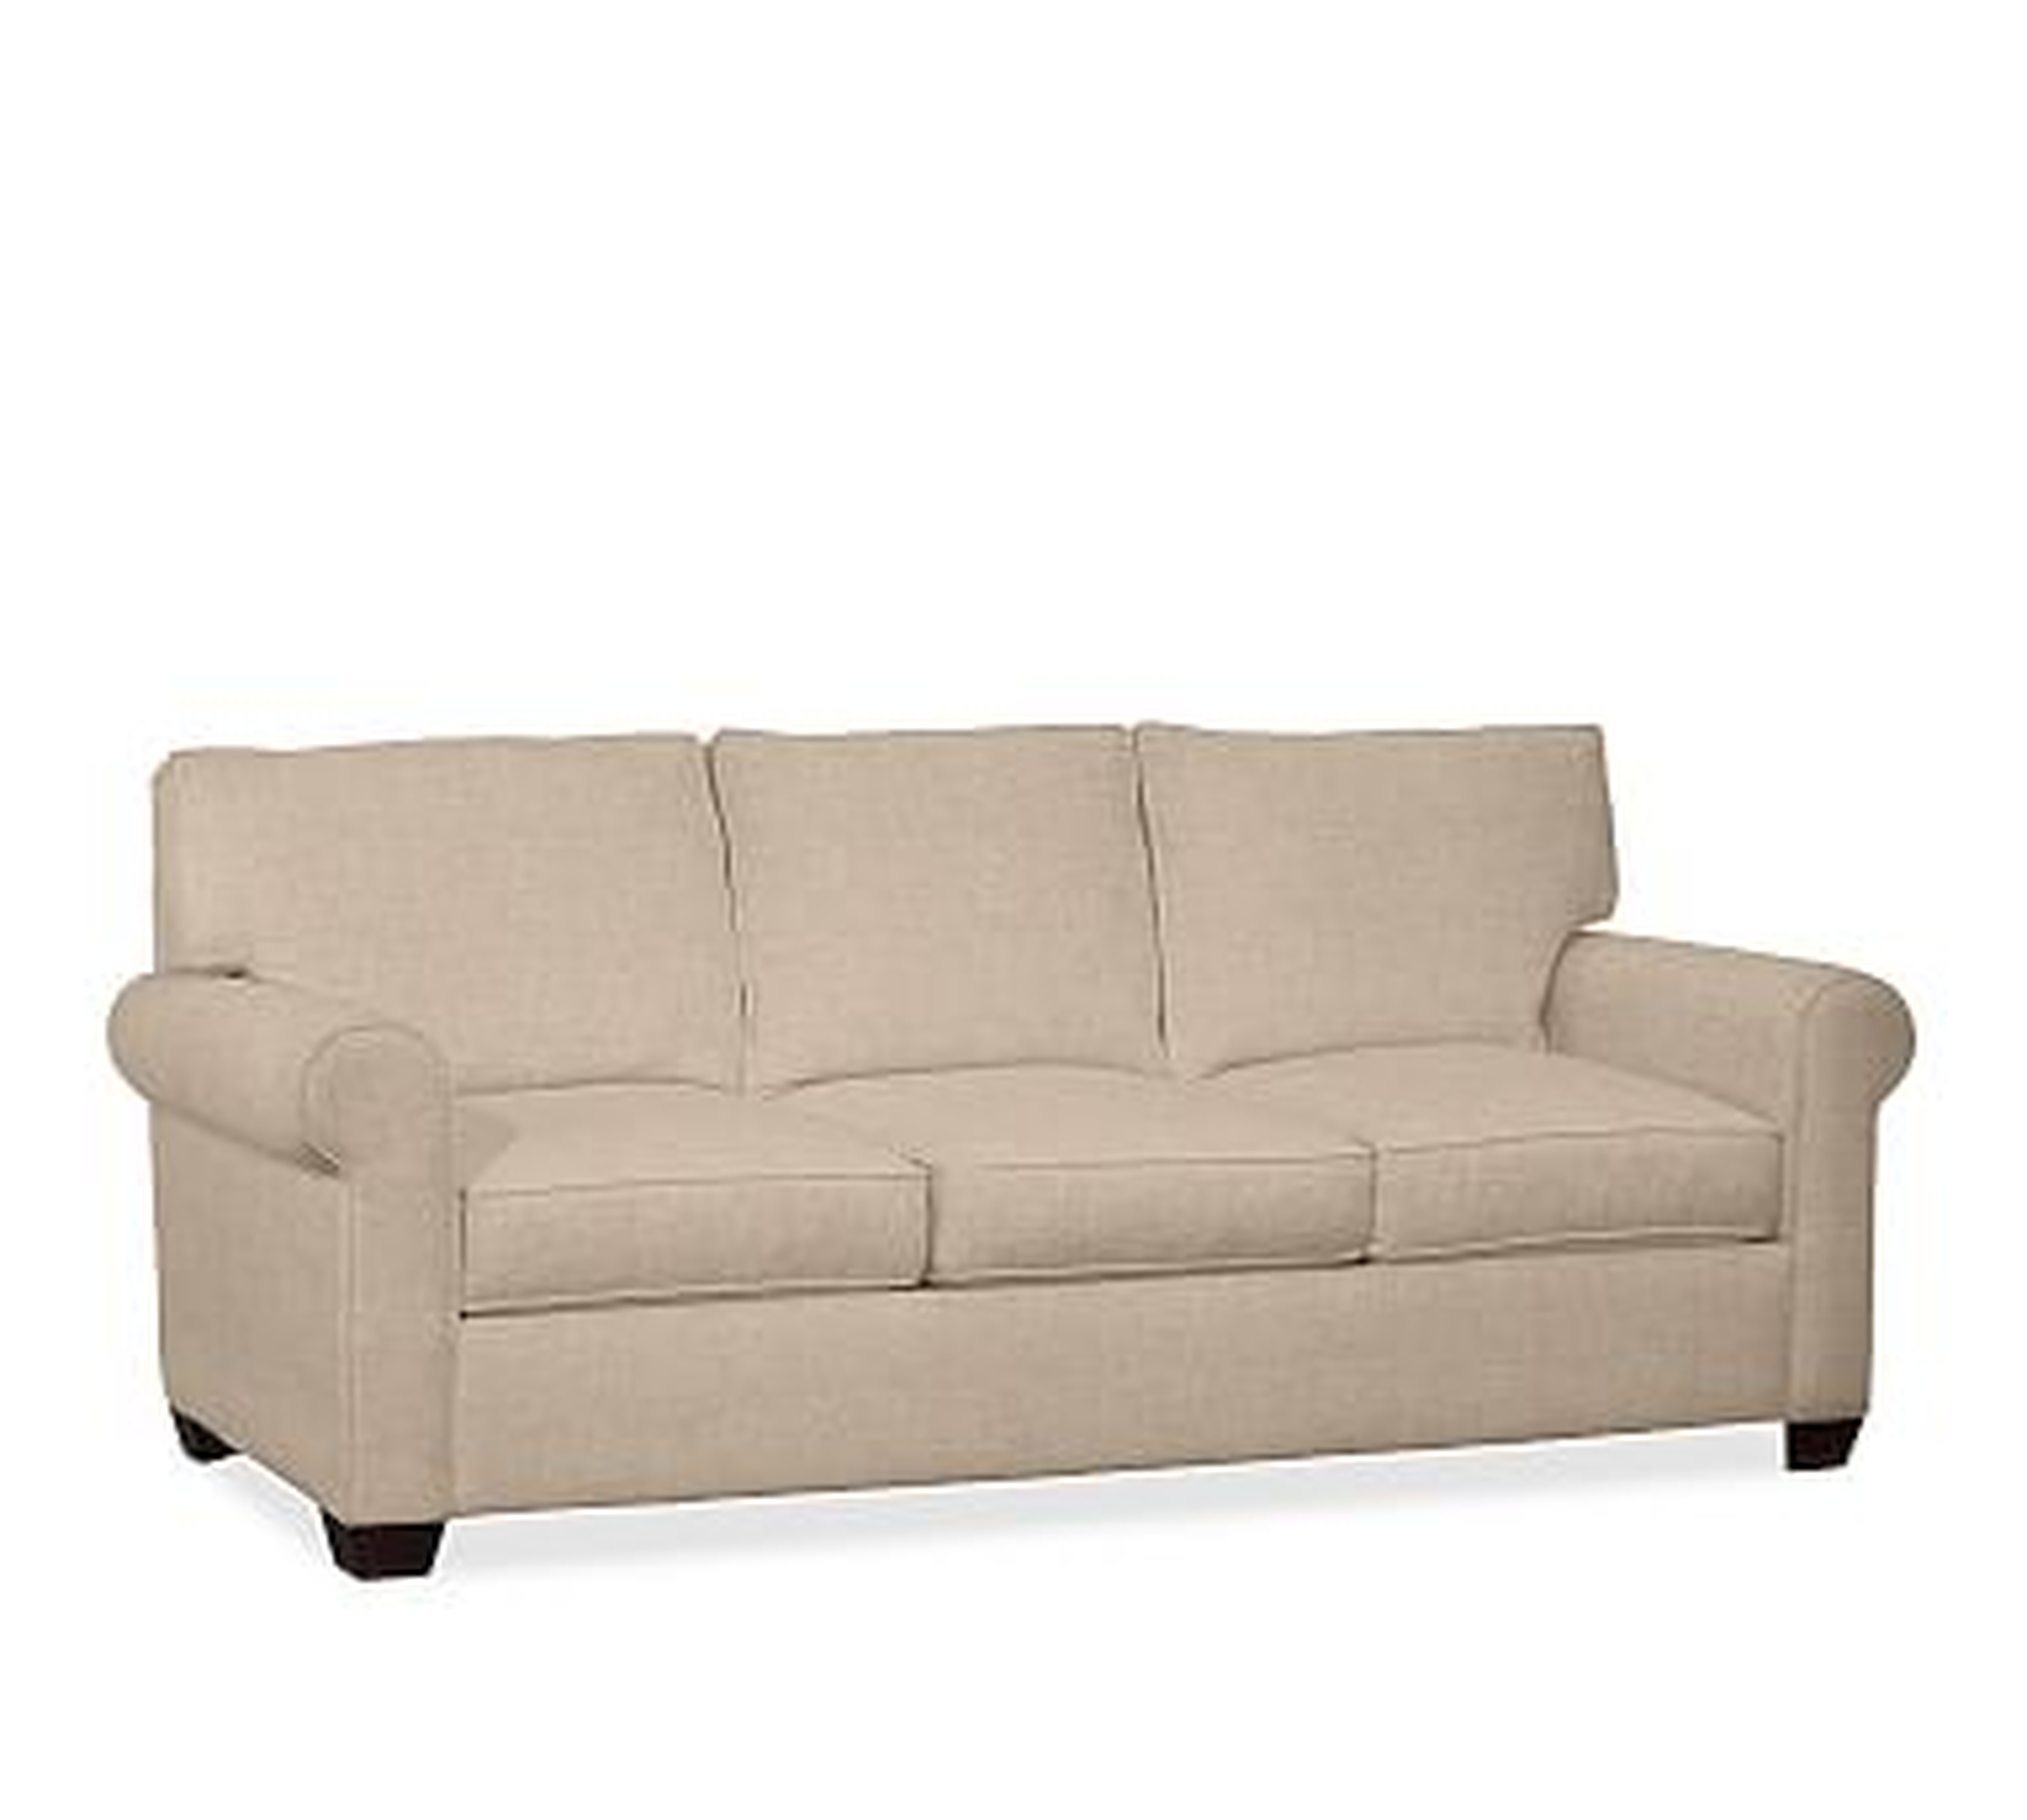 Buchanan Roll Arm Upholstered Grand Sofa, Polyester Wrapped Cushions, Performance everydaylinen(TM) Stone - Pottery Barn